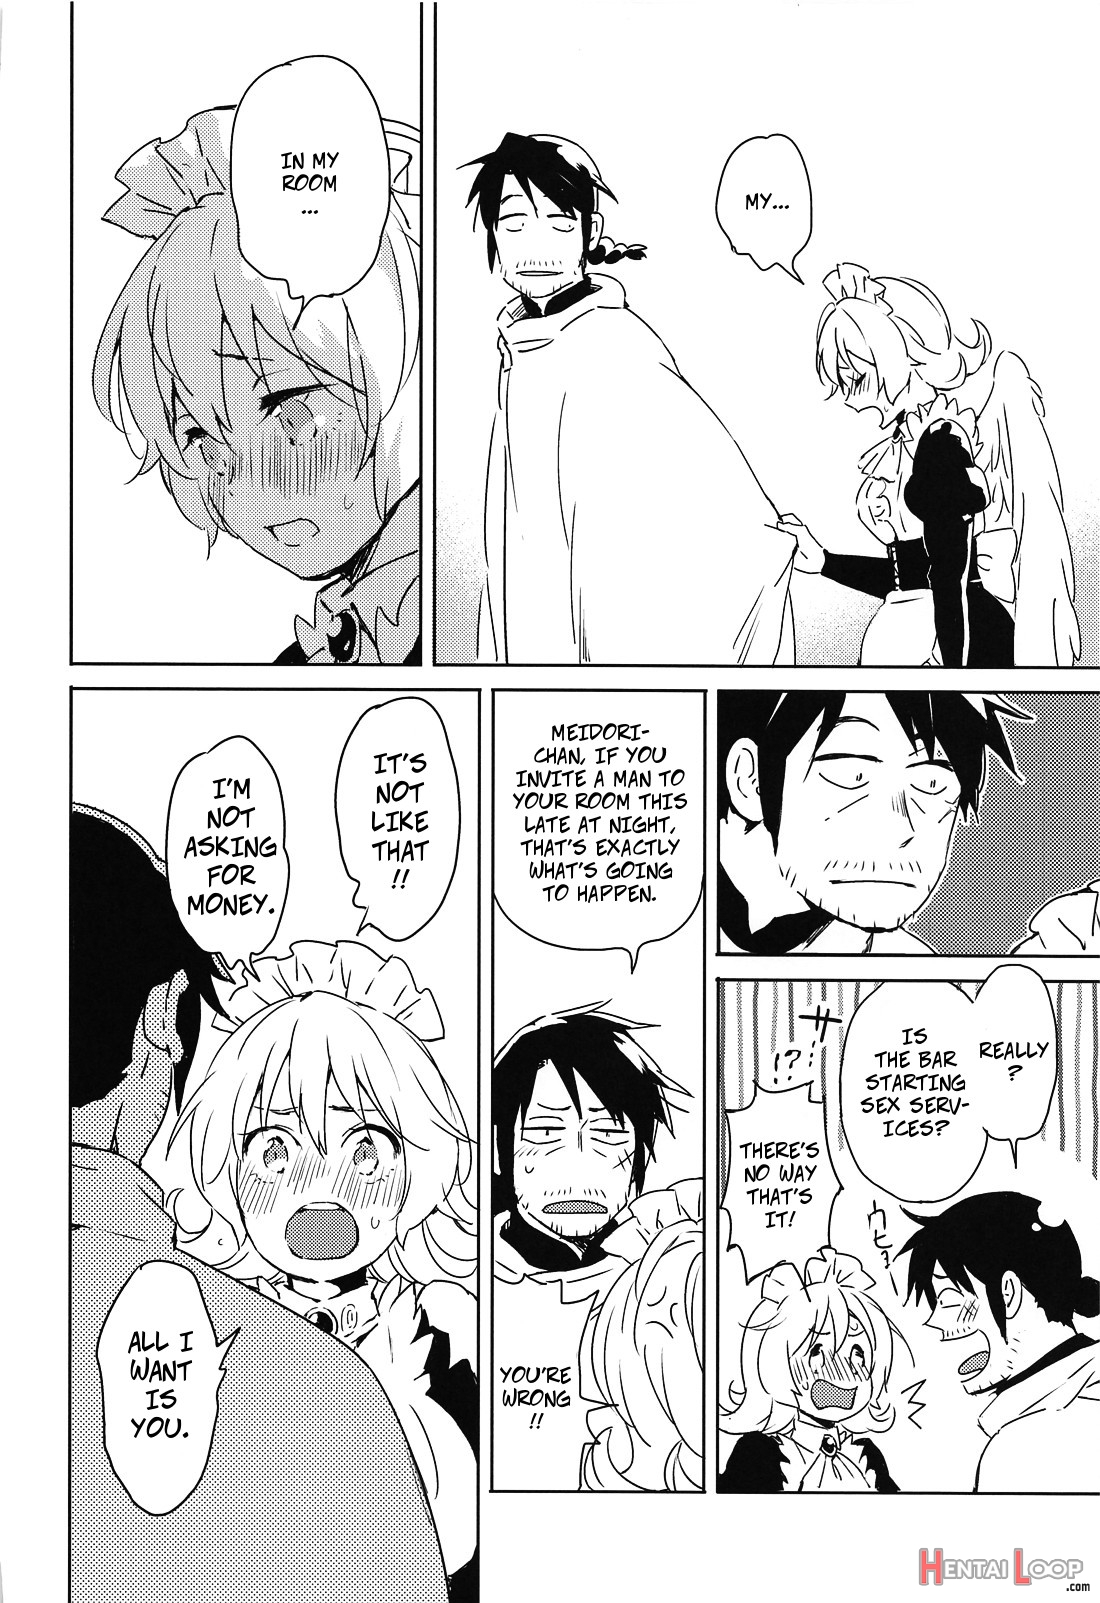 I Can't Die Until I Have Sex With Meidori-chan page 7